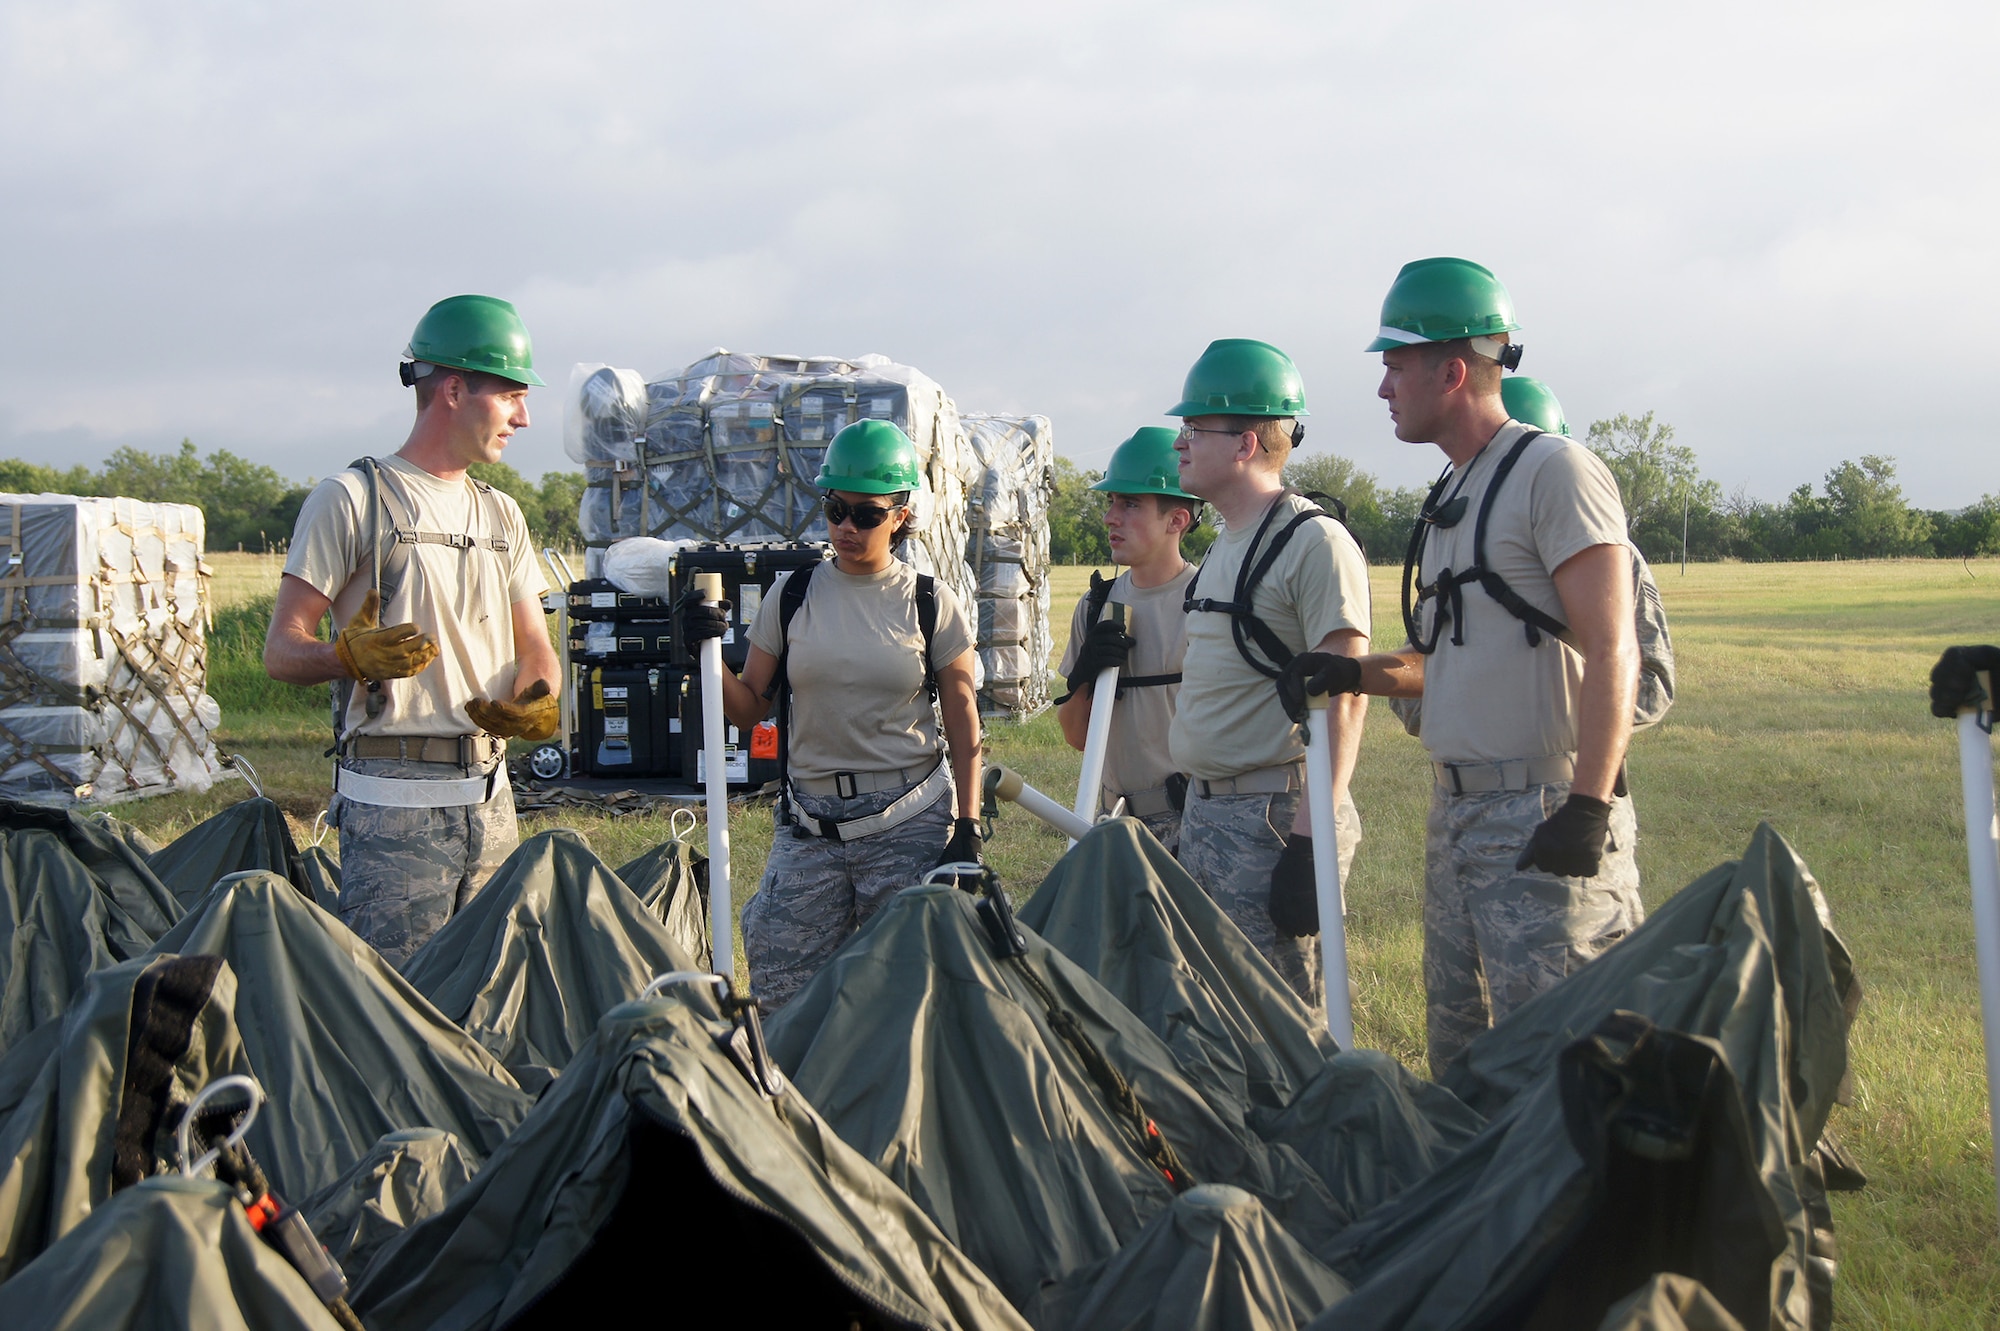 Members of the 35th Combat Communications Squadron, Tinker Air Force Base, Okla., hone their skill during a field training exercise at the Lackland AFB Media Annex in San Antonio, Texas. The 35th CBCS is one of four Reserve combat communications squadrons each located in separate regions of the country that provide theater-deployable communications during wartime and contingency operations or humanitarian missions in austere locations.